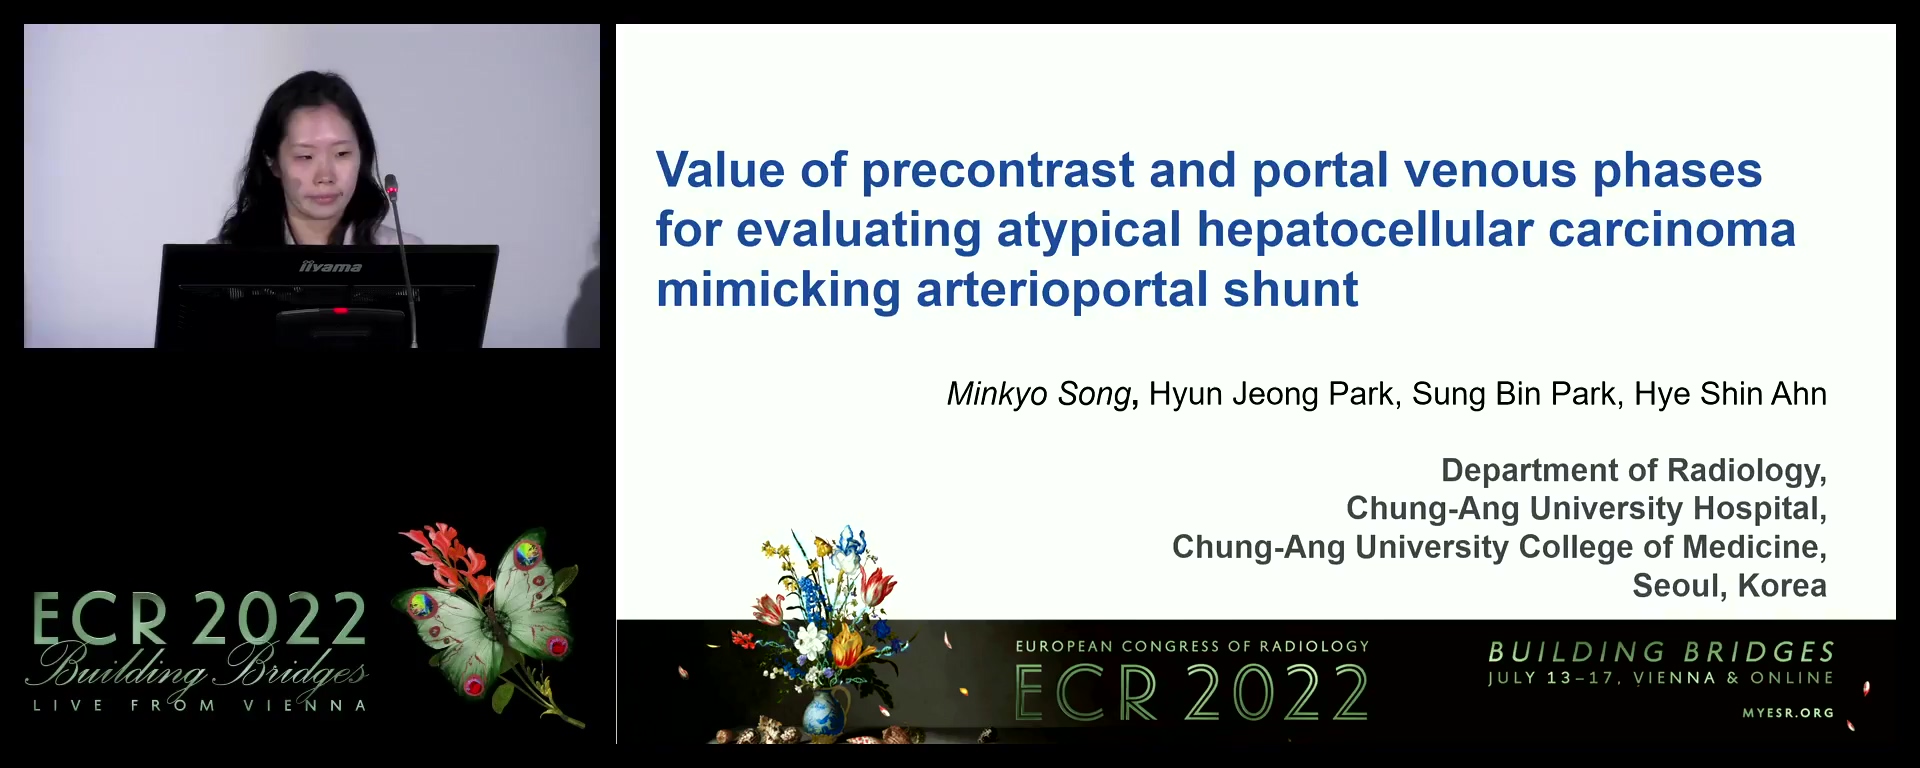 Value of precontrast and portal venous phases for evaluating atypical hepatocellular carcinoma mimicking arterioportal shunt - Minkyo Song, Seoul / KR